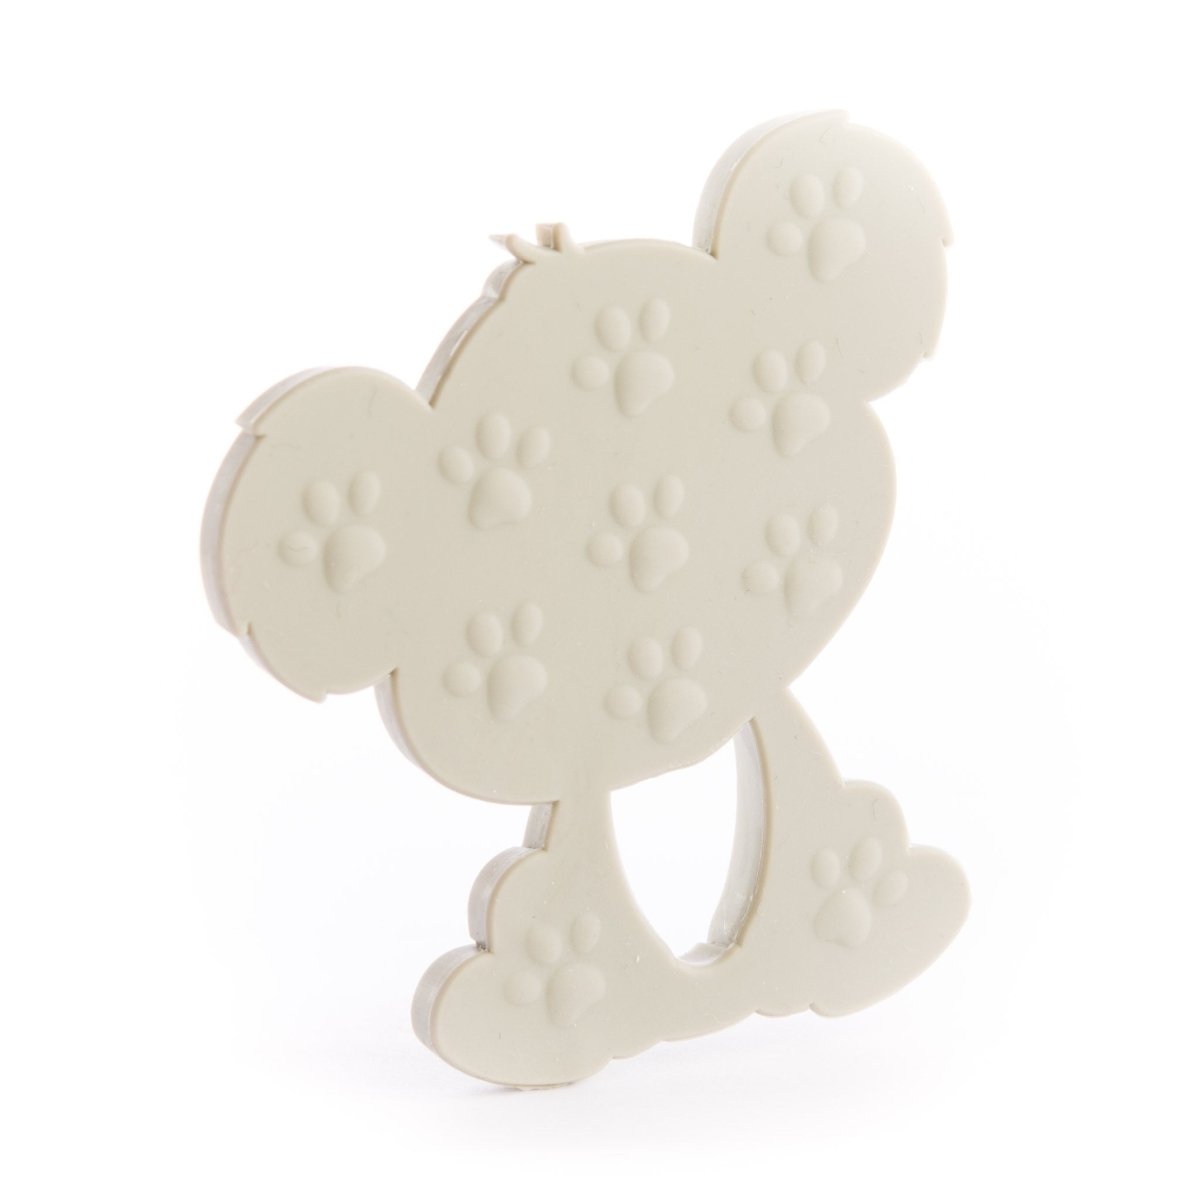 Silicone Teethers and Pendants Koalas from Cara & Co Craft Supply